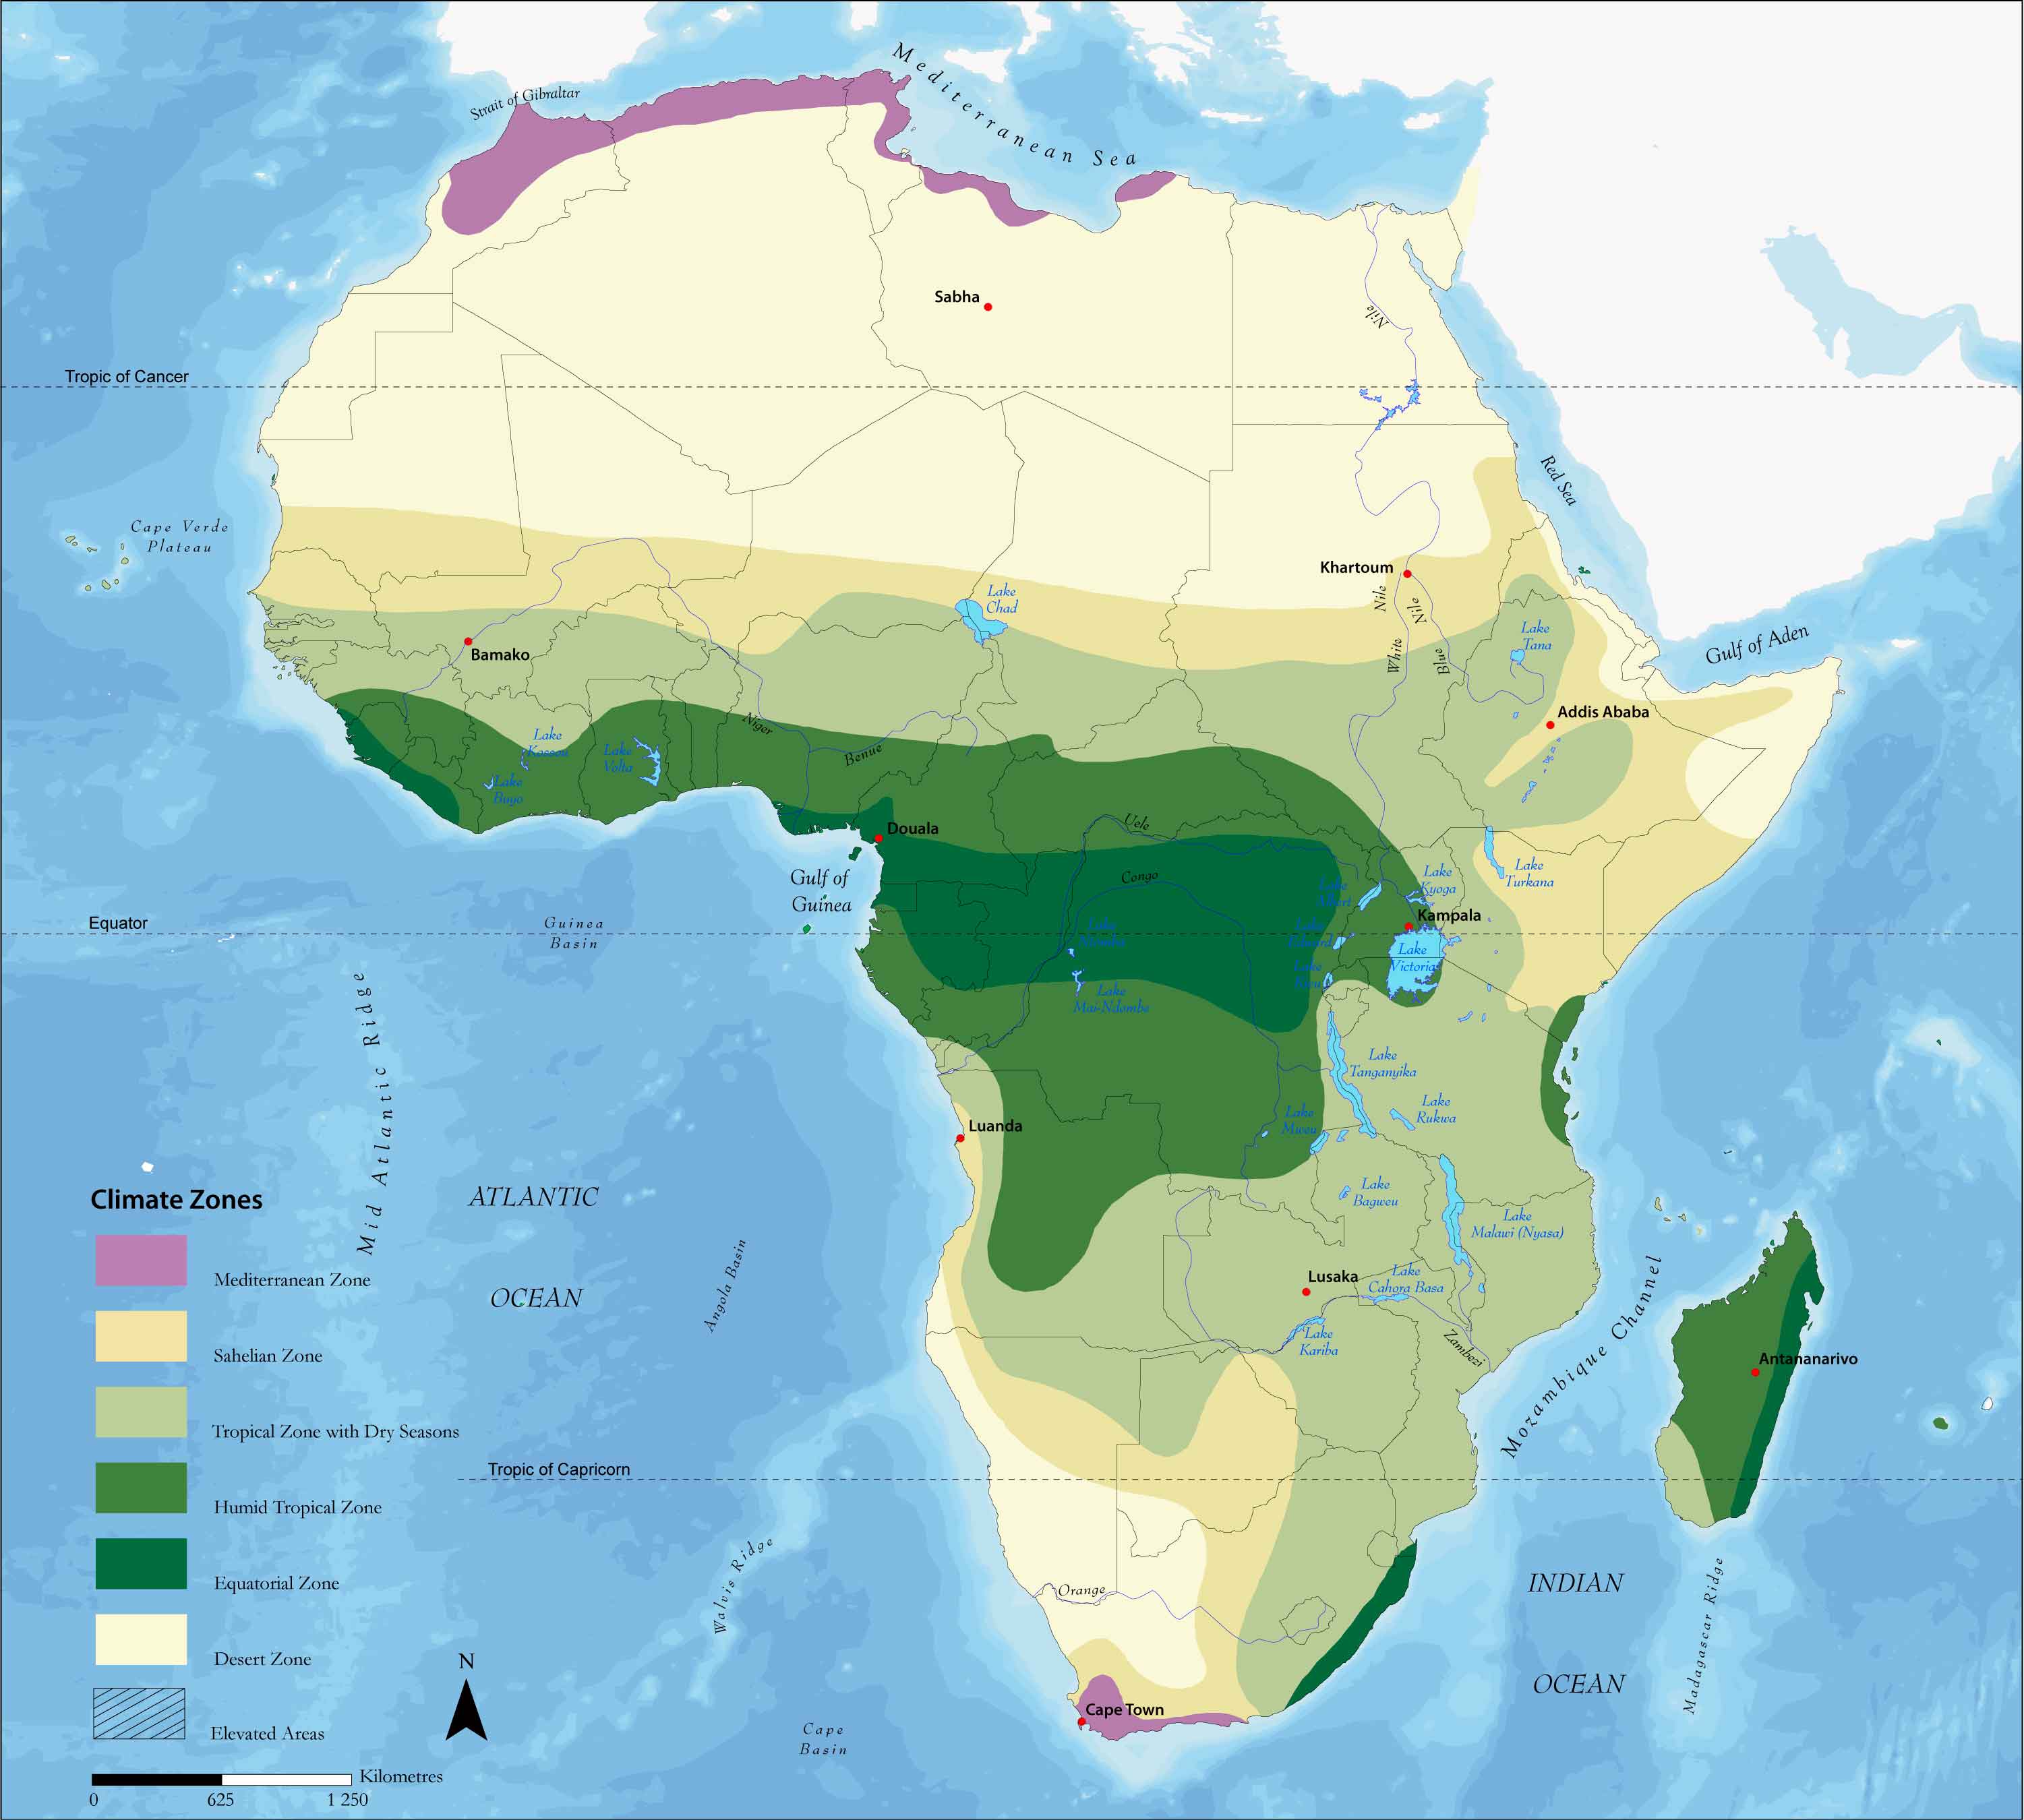 climate of africa map Africa Climate Zones Full Size Gifex climate of africa map